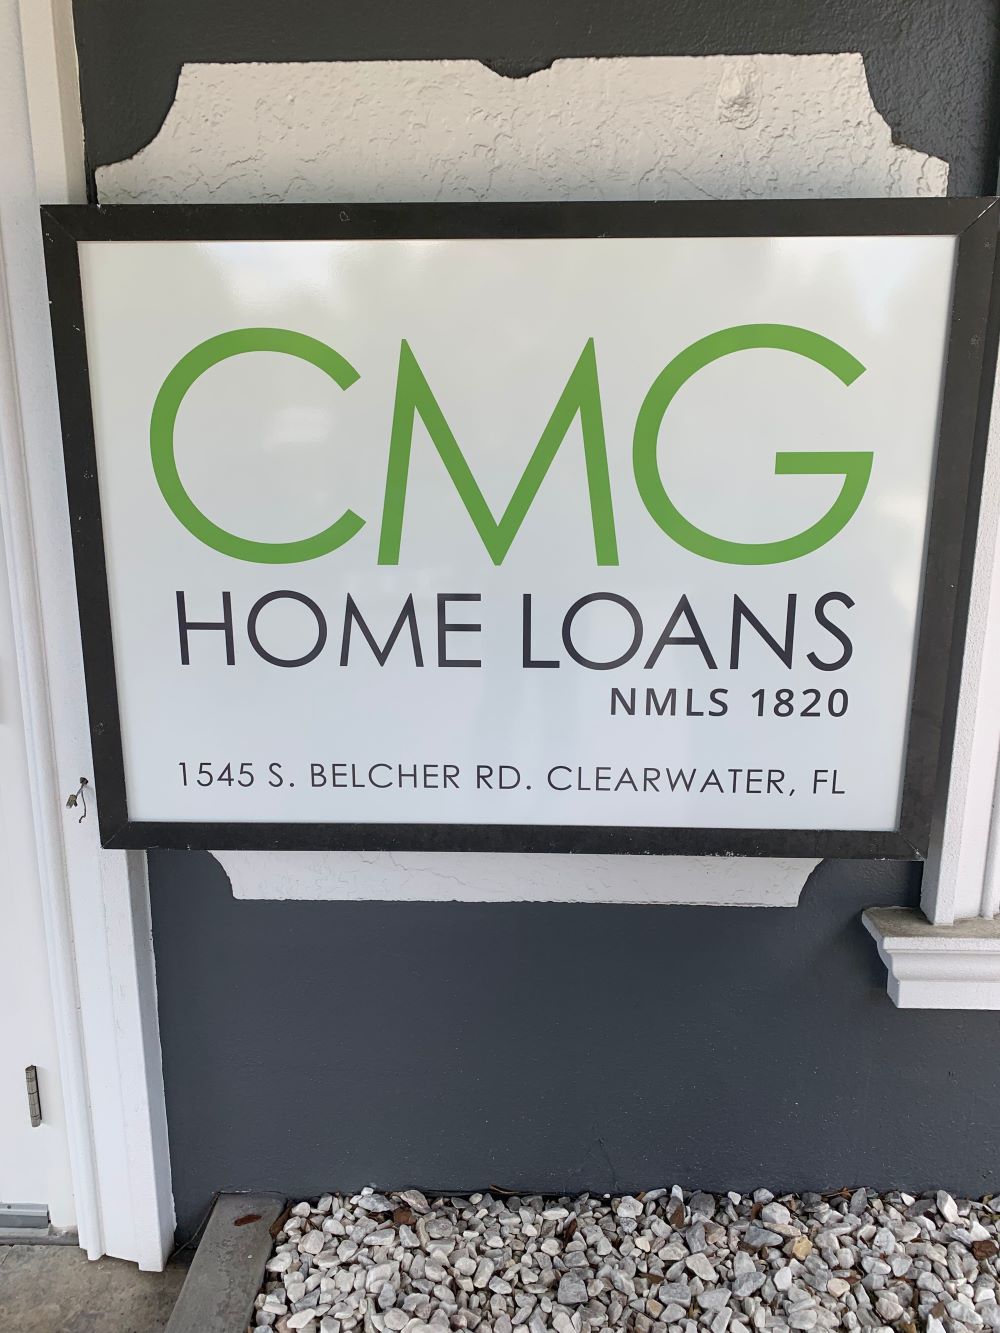 CMG Home Loans Business Signs Made by Southlake Signs Tampa in Tampa, FL